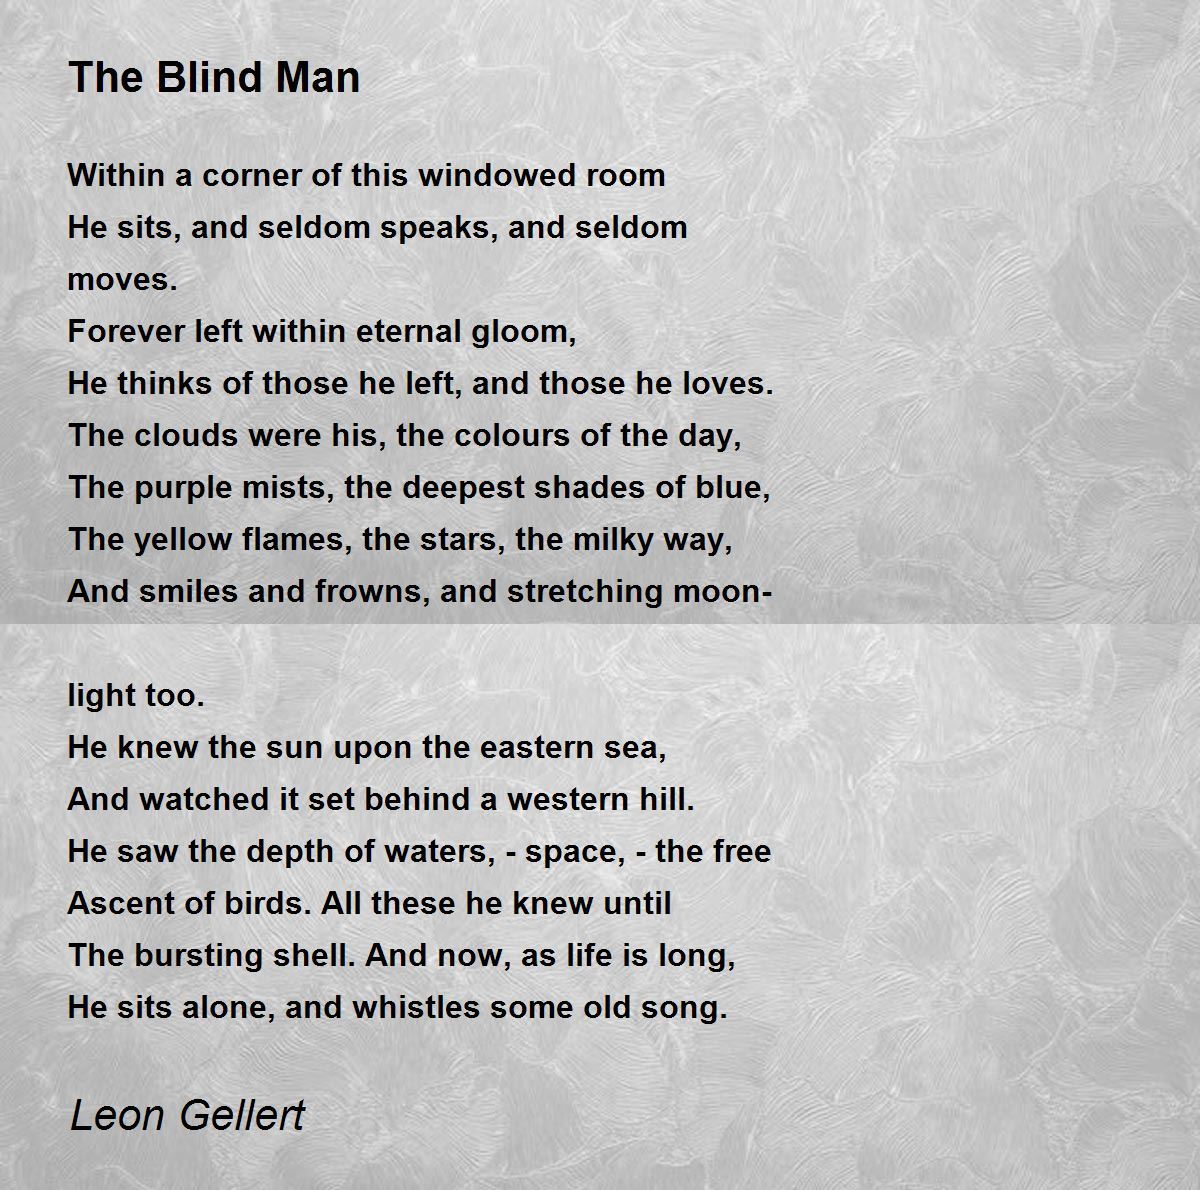 essay about blind man